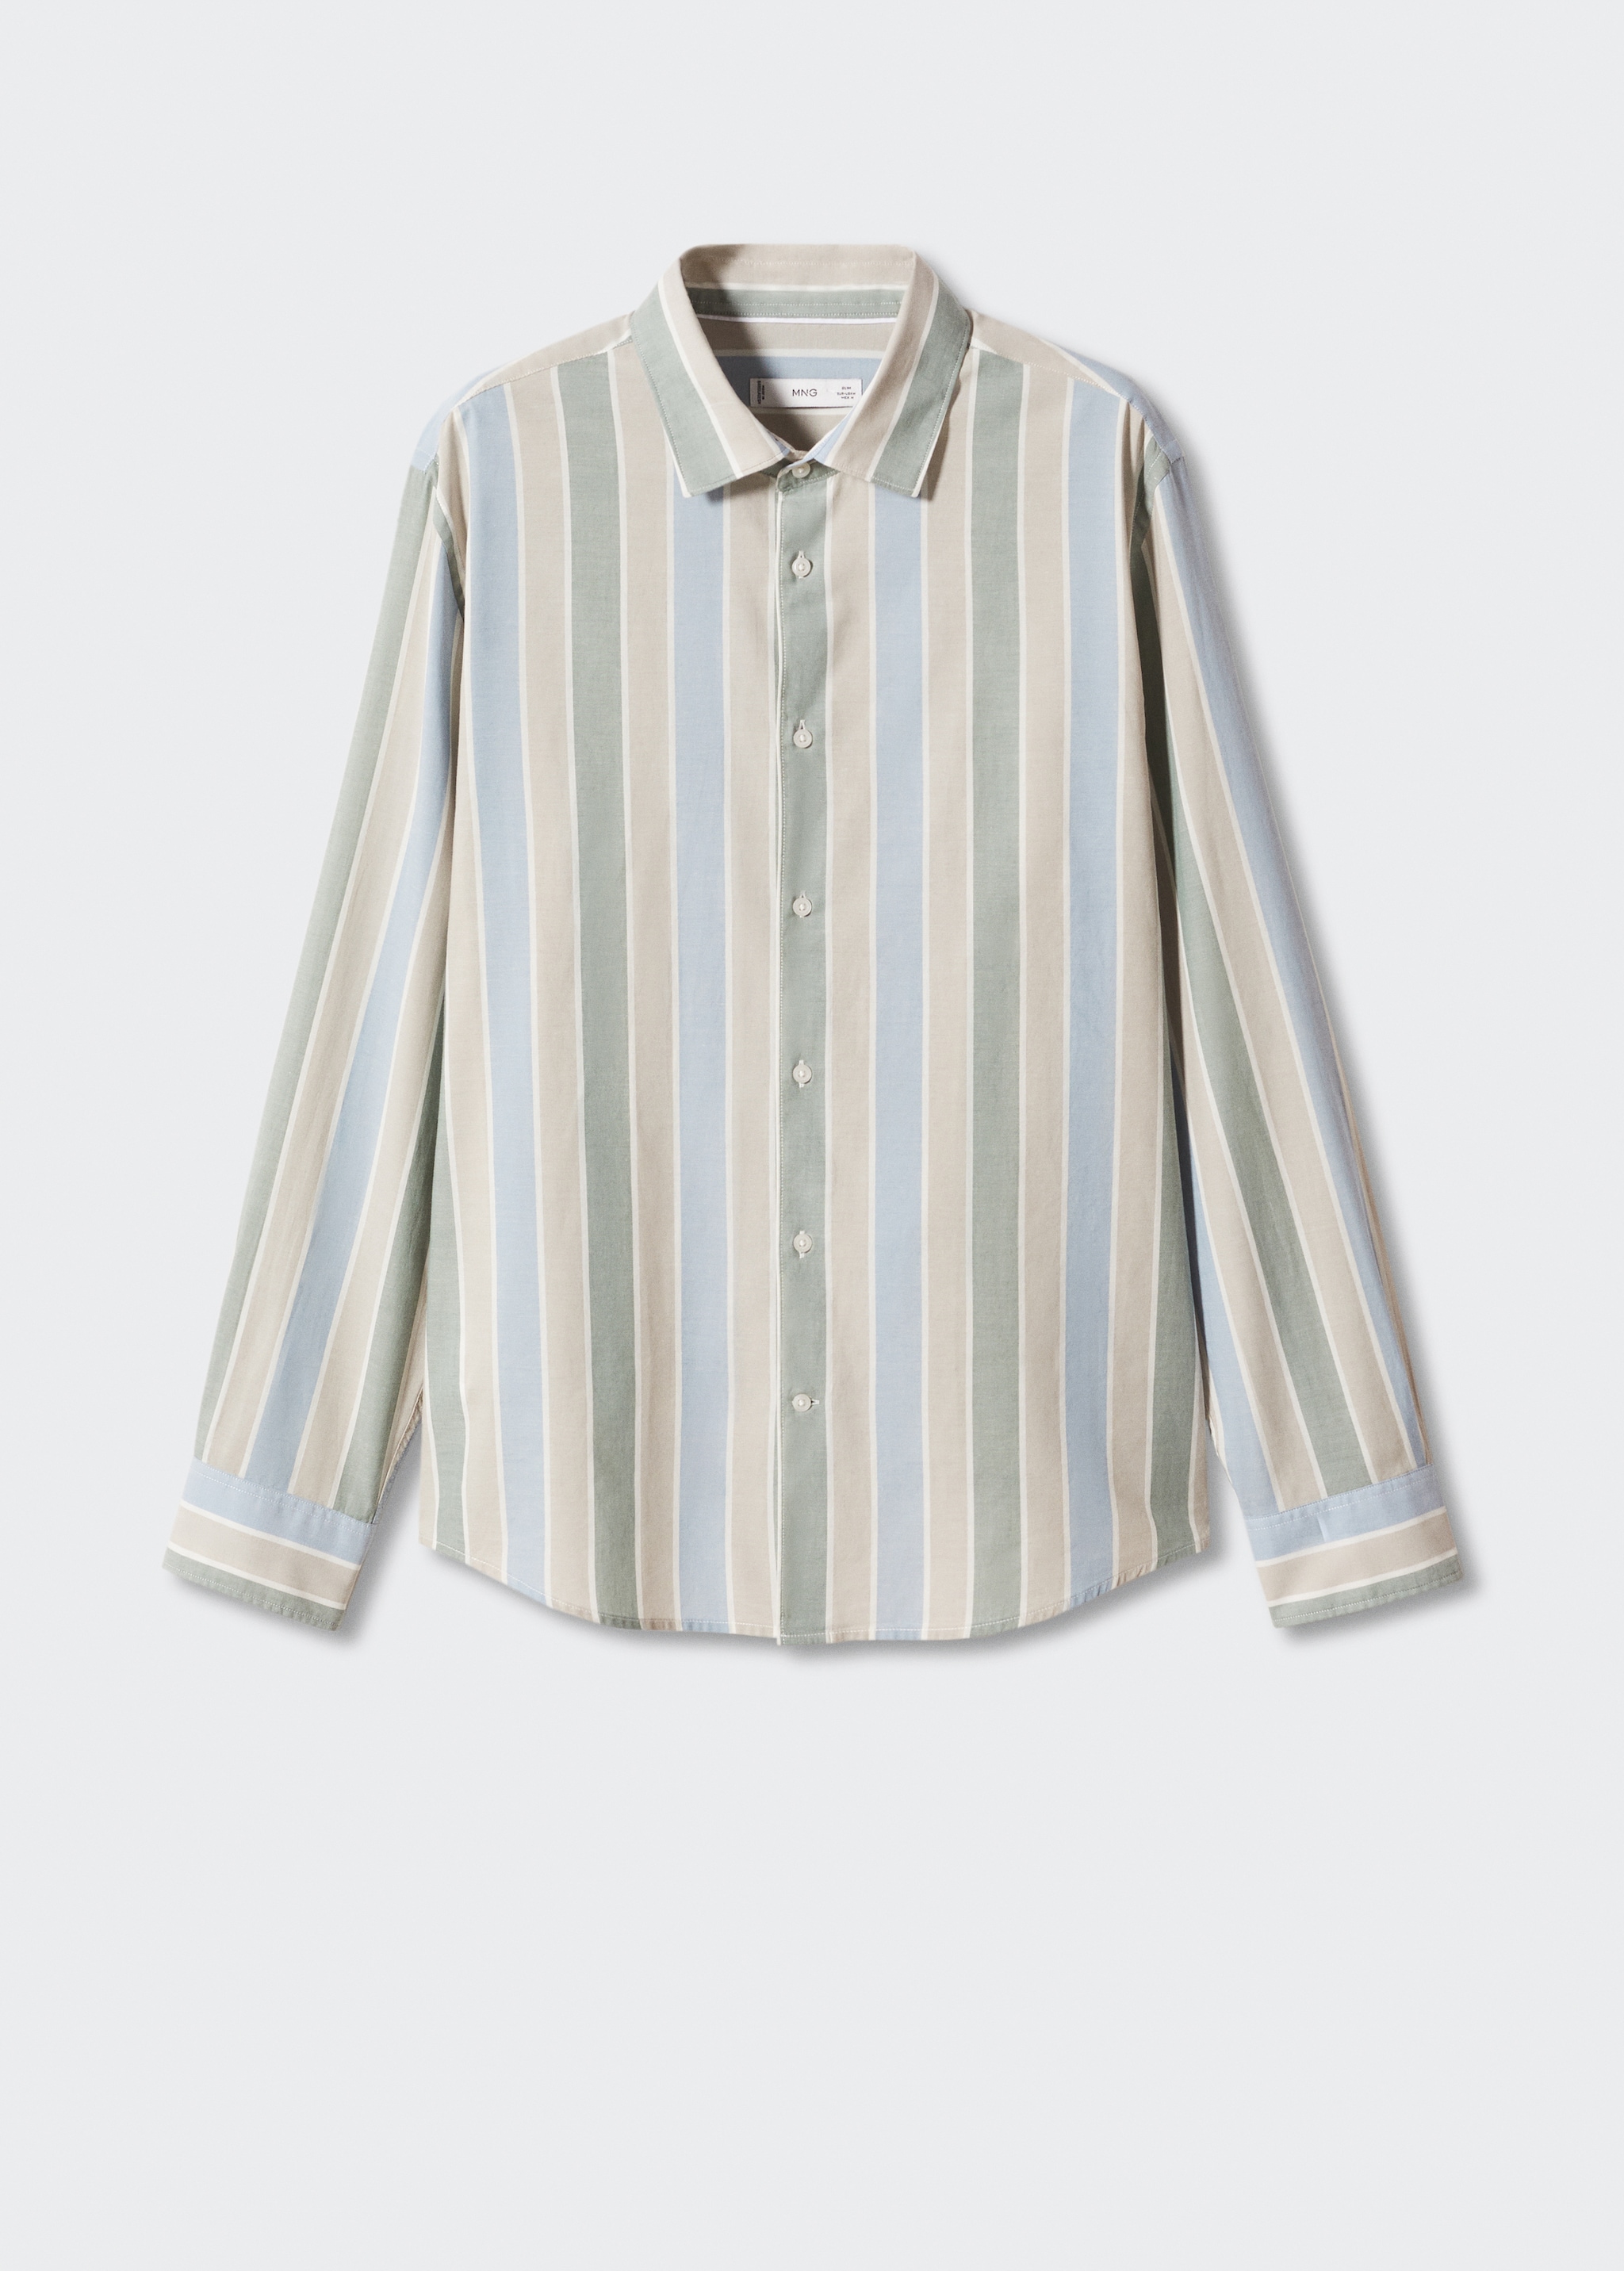 100% cotton striped shirt - Article without model